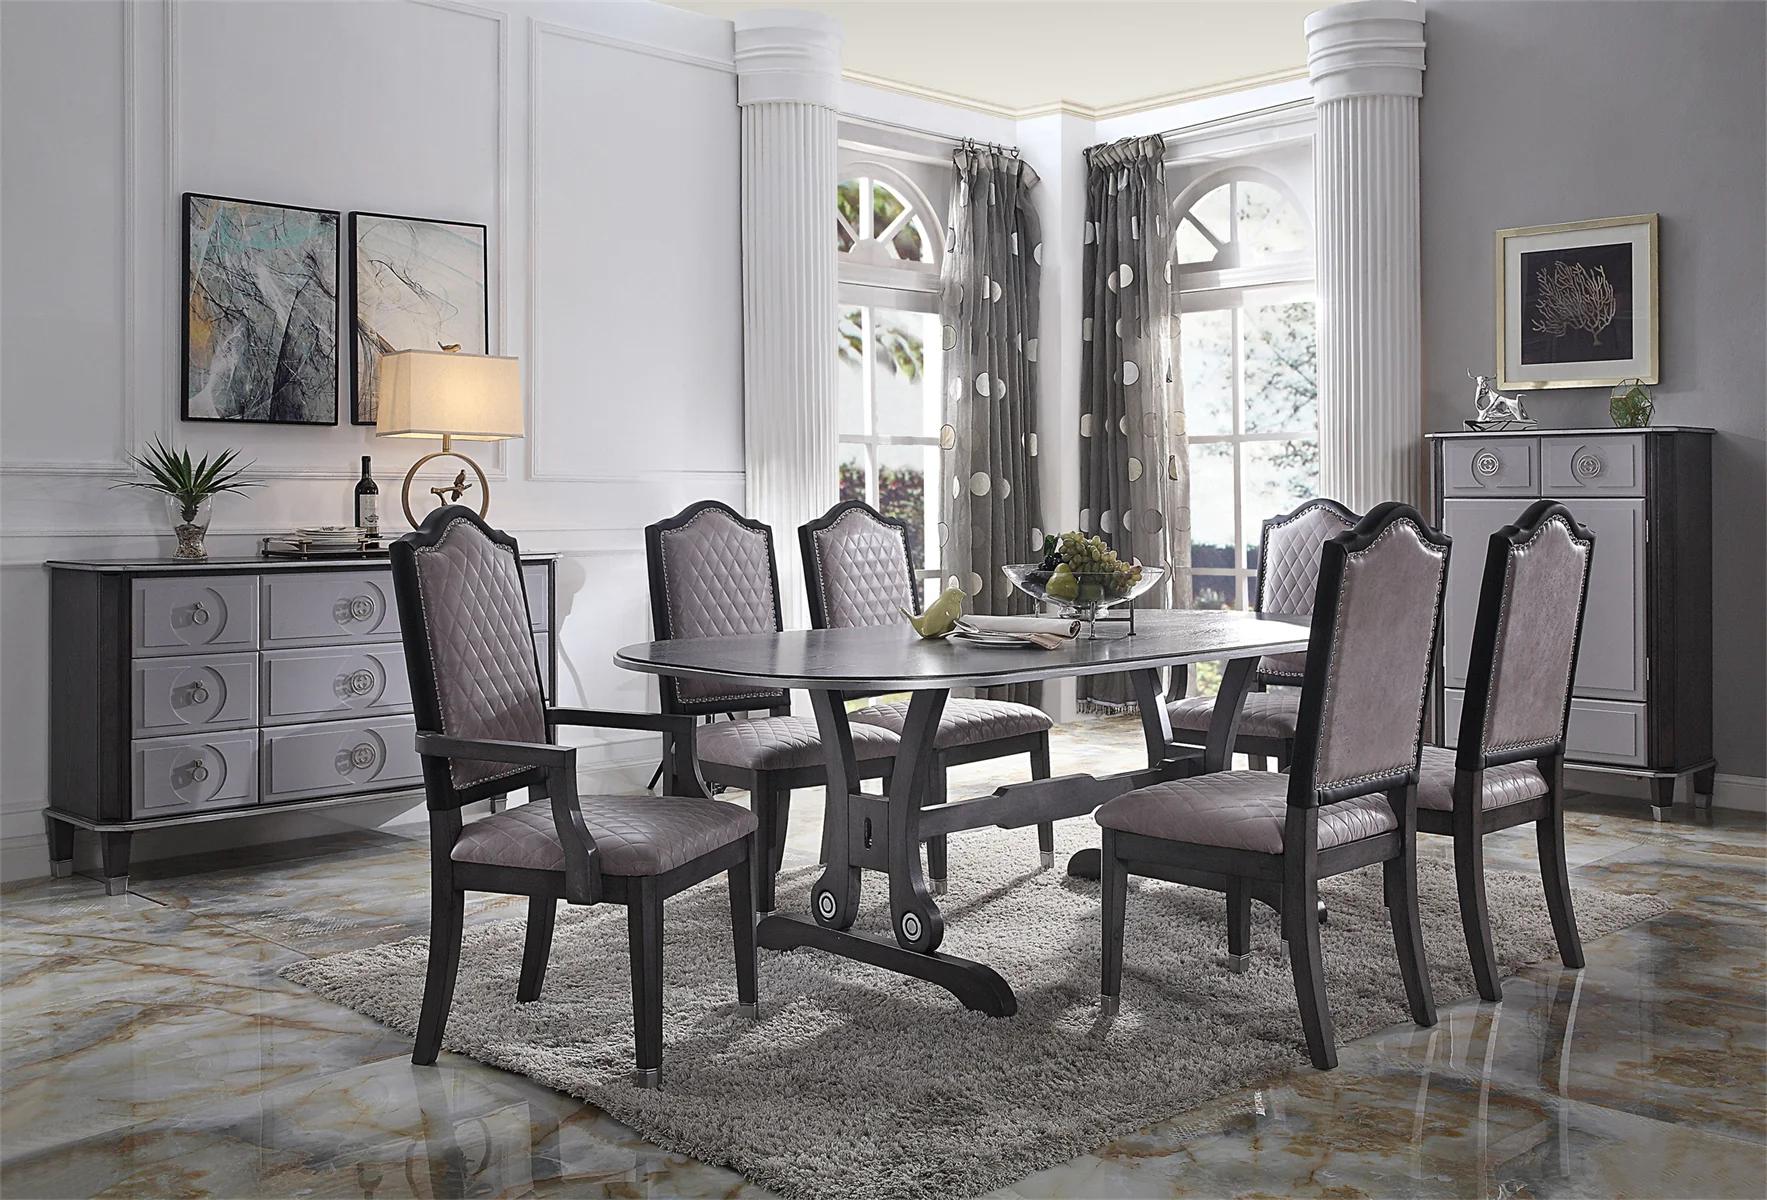 Transitional Dining Room Set House Beatrice 68810-9pcs in Charcoal Fabric